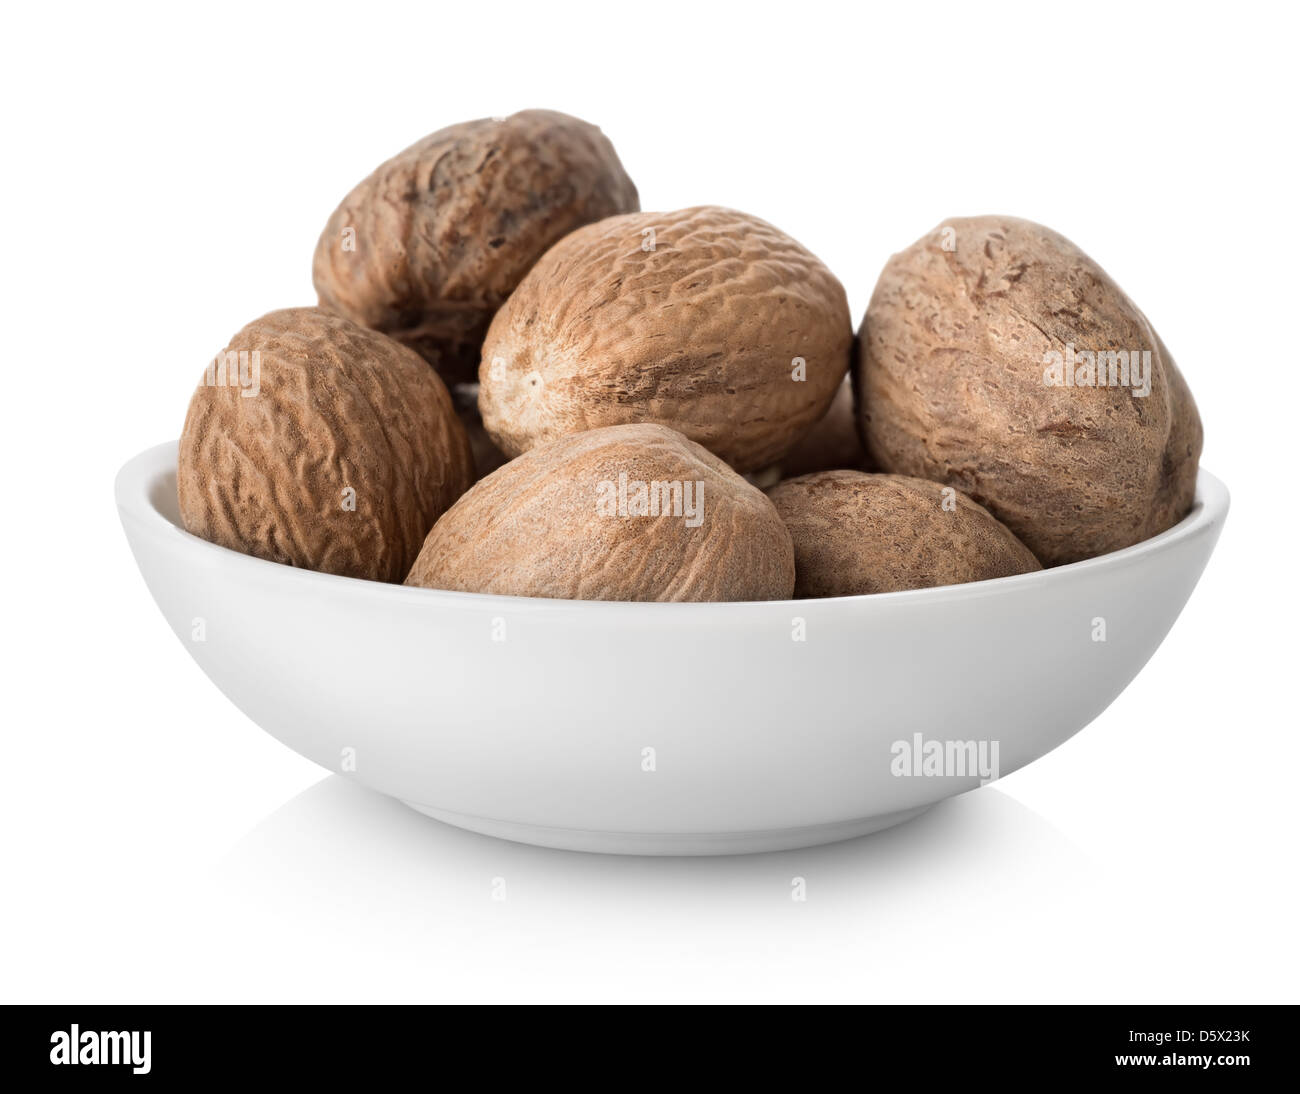 Nutmegs in plate isolated on white background Stock Photo